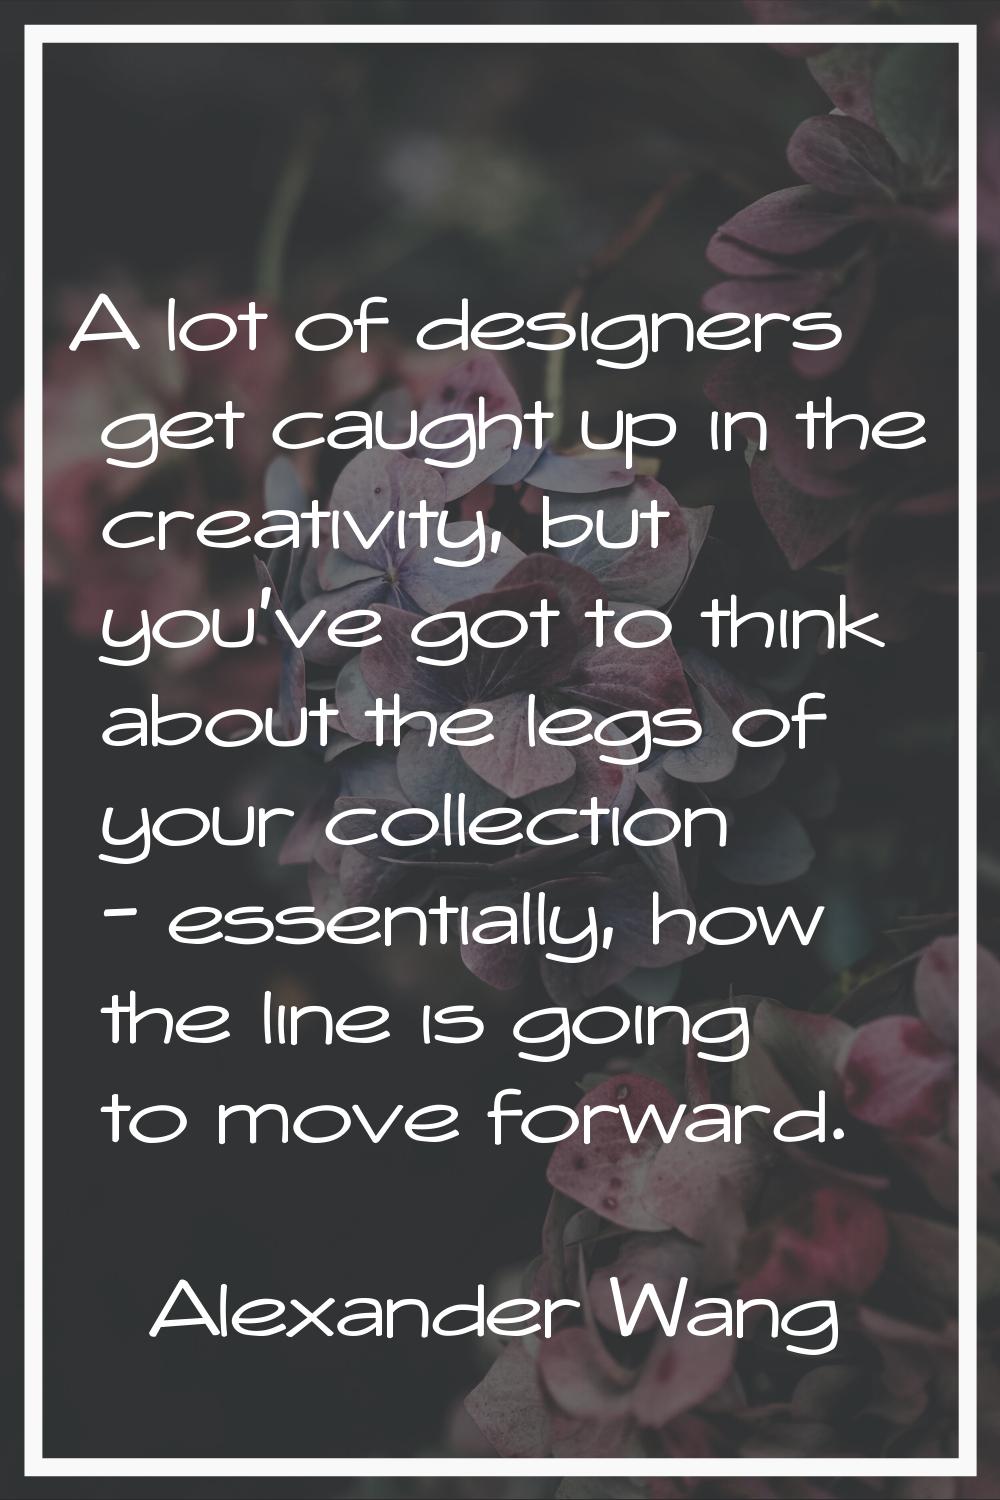 A lot of designers get caught up in the creativity, but you've got to think about the legs of your 